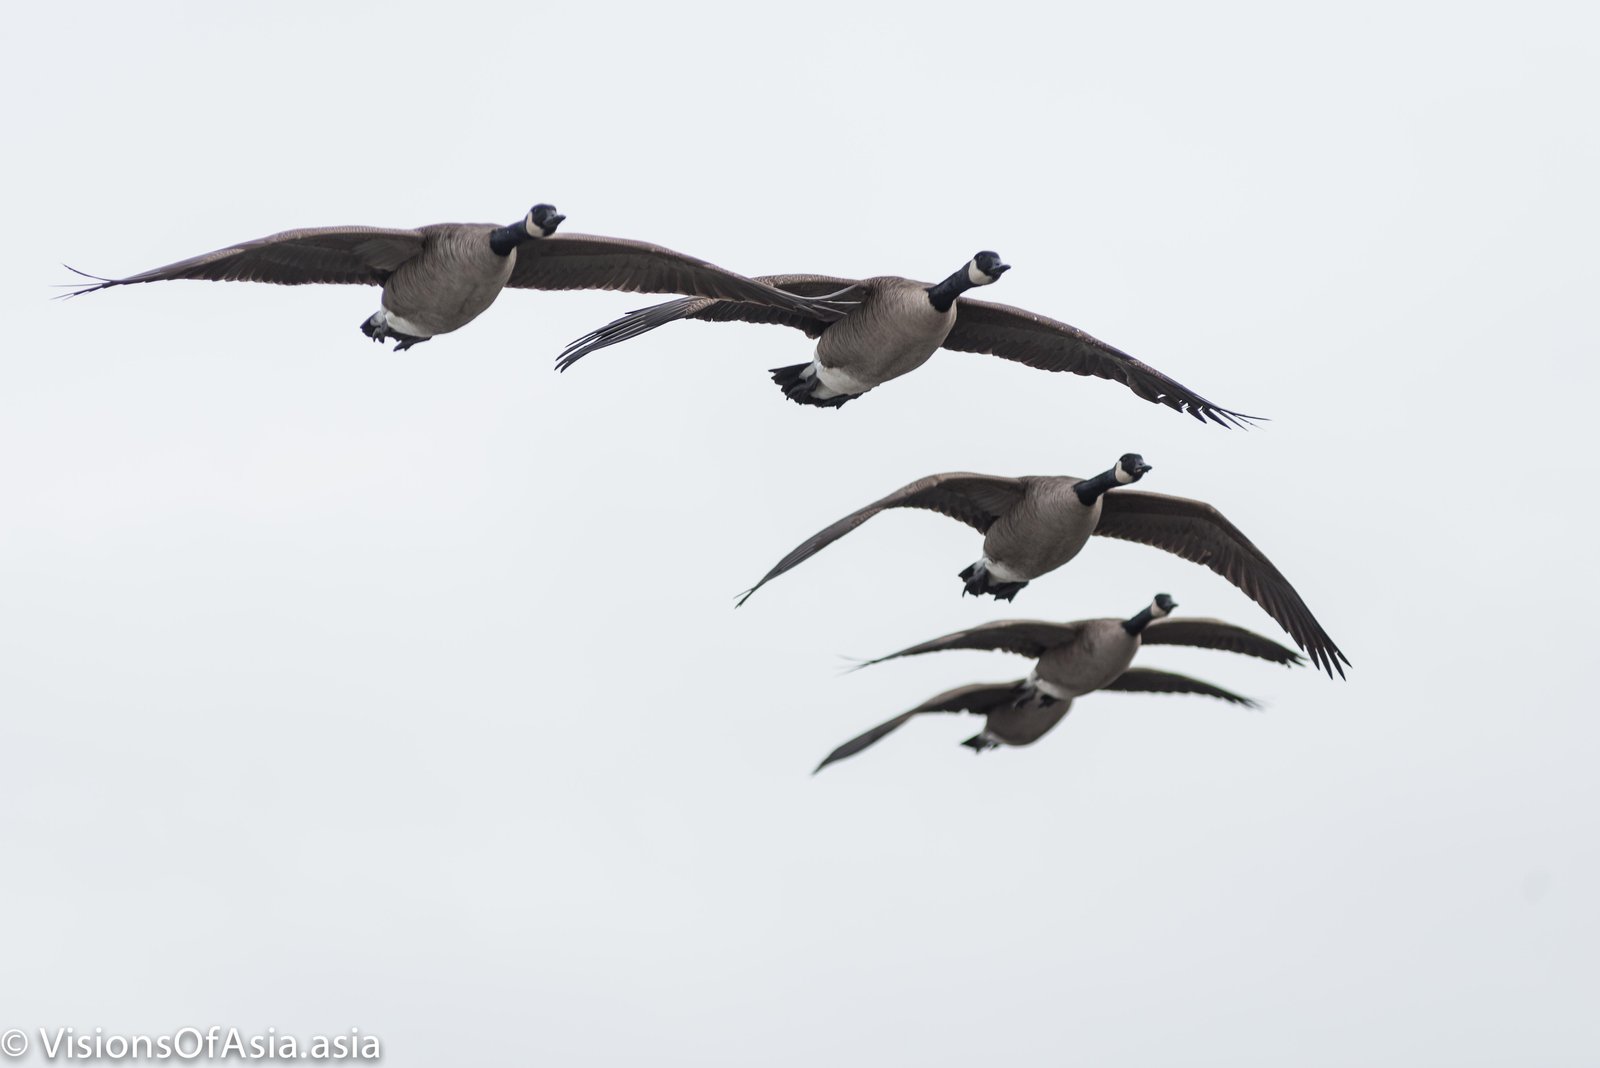 Geese flying in English bay